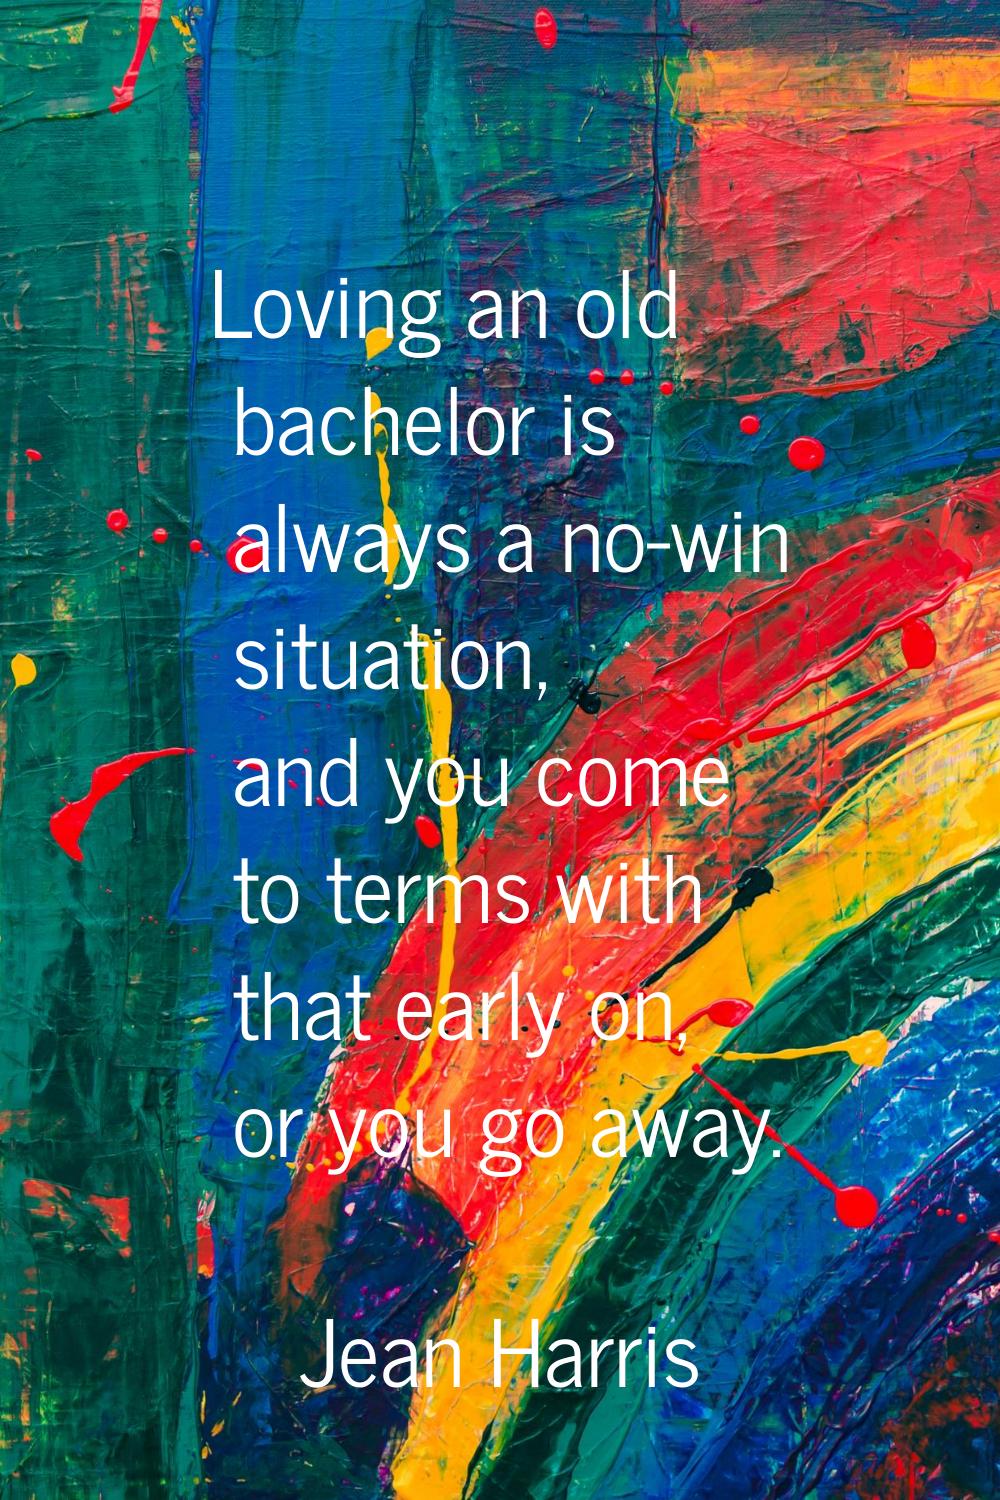 Loving an old bachelor is always a no-win situation, and you come to terms with that early on, or y